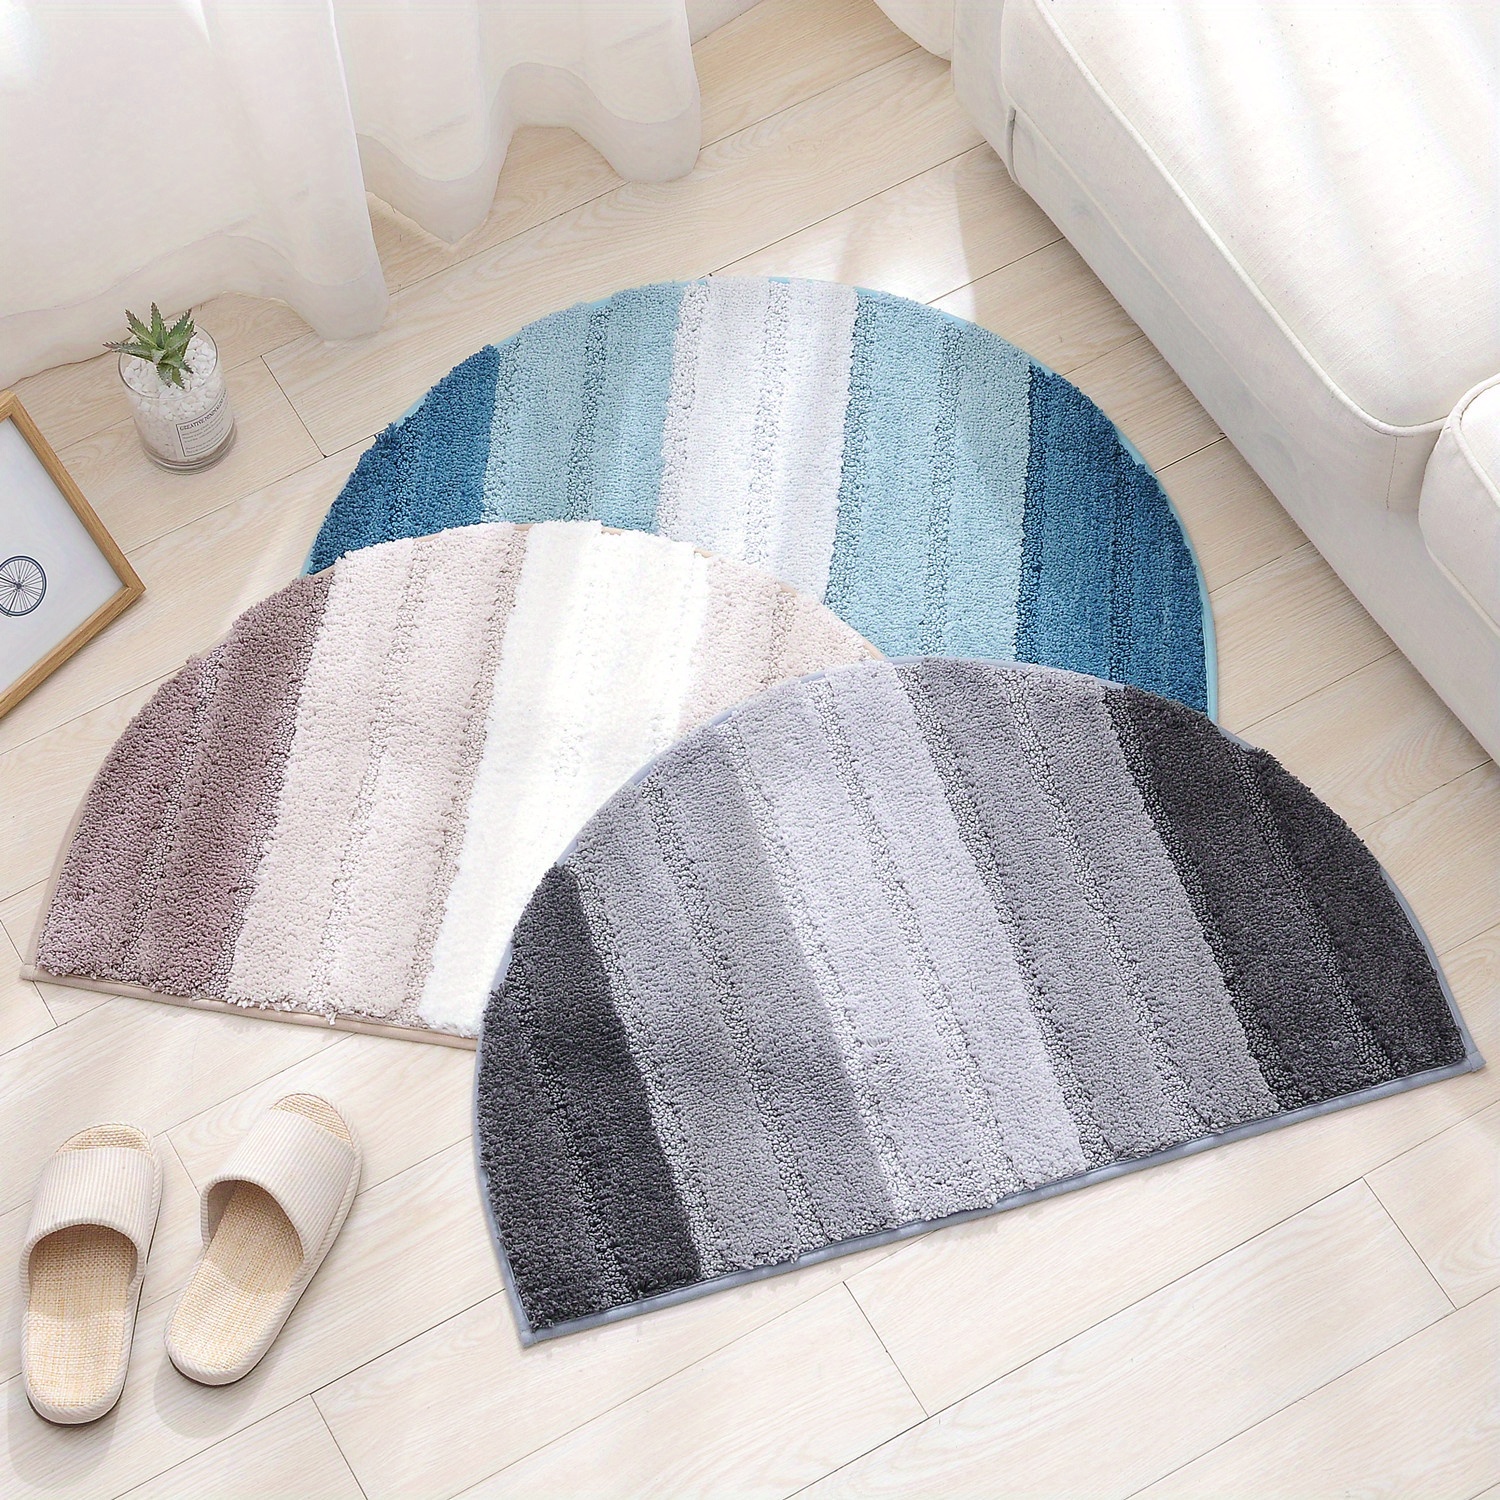 Semicircle Bathroom Non-slip Mat, Water Absorbent Rug For Home Entrance,  Toilet And Bathroom Drying Quickly